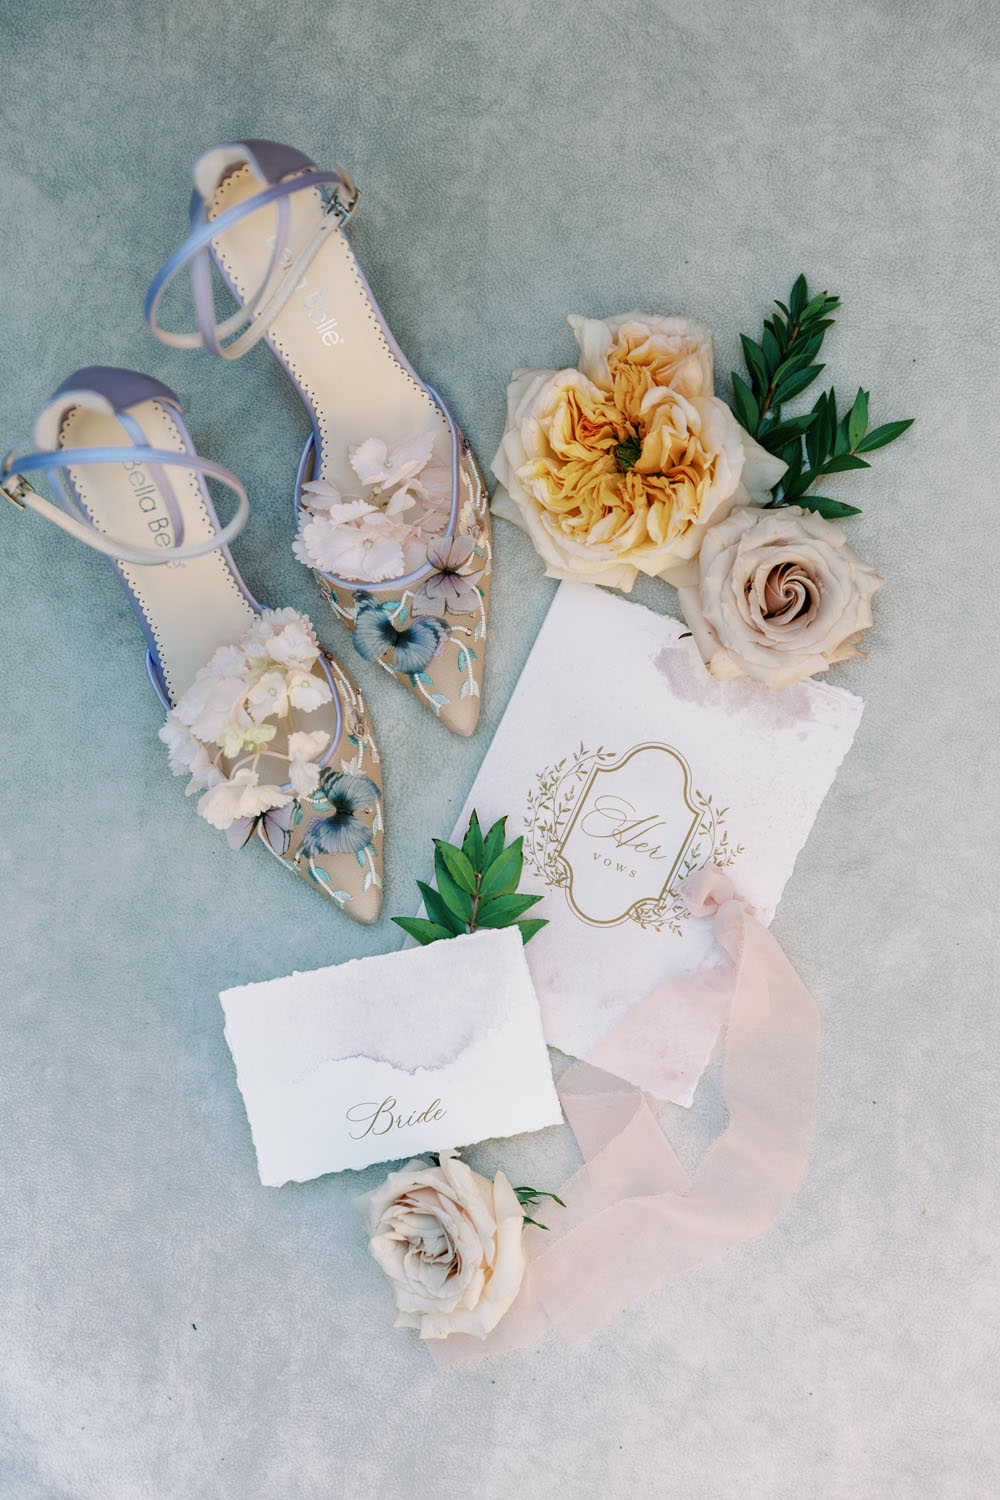 Butterfly wedding shoes and elegant wedding details